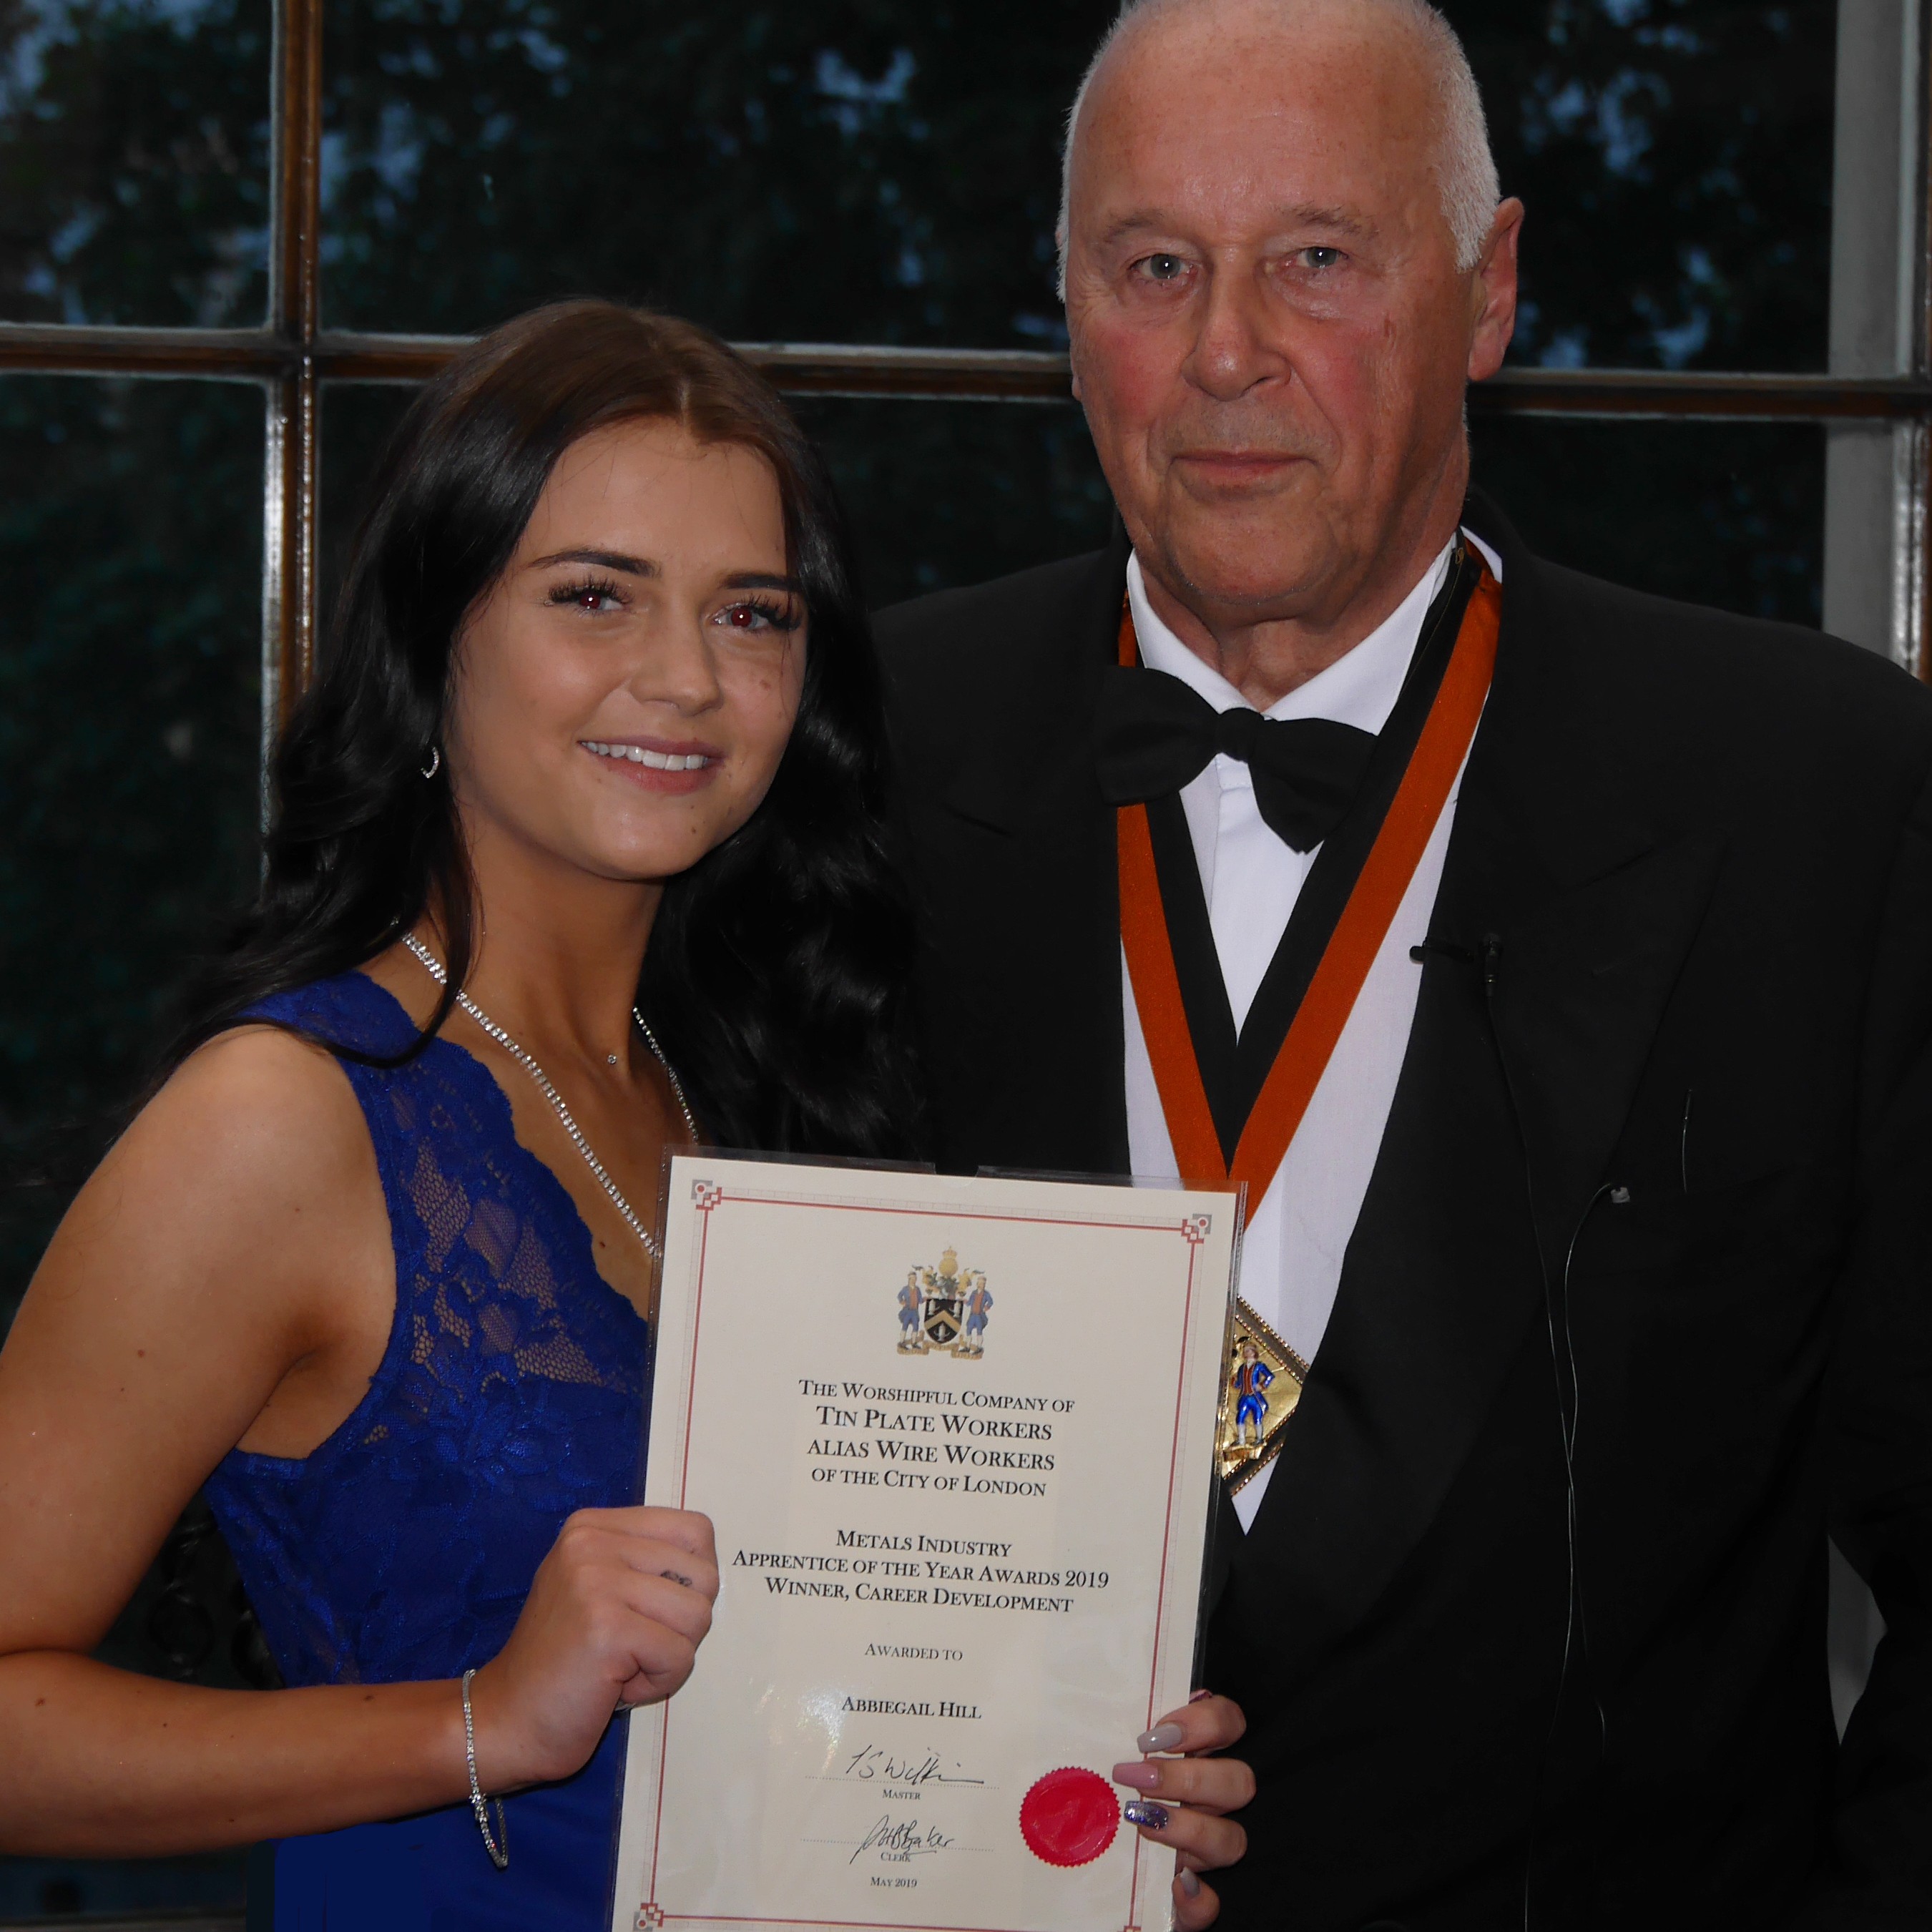 Abbiegail Hill collects her apprentice of the year award 2019